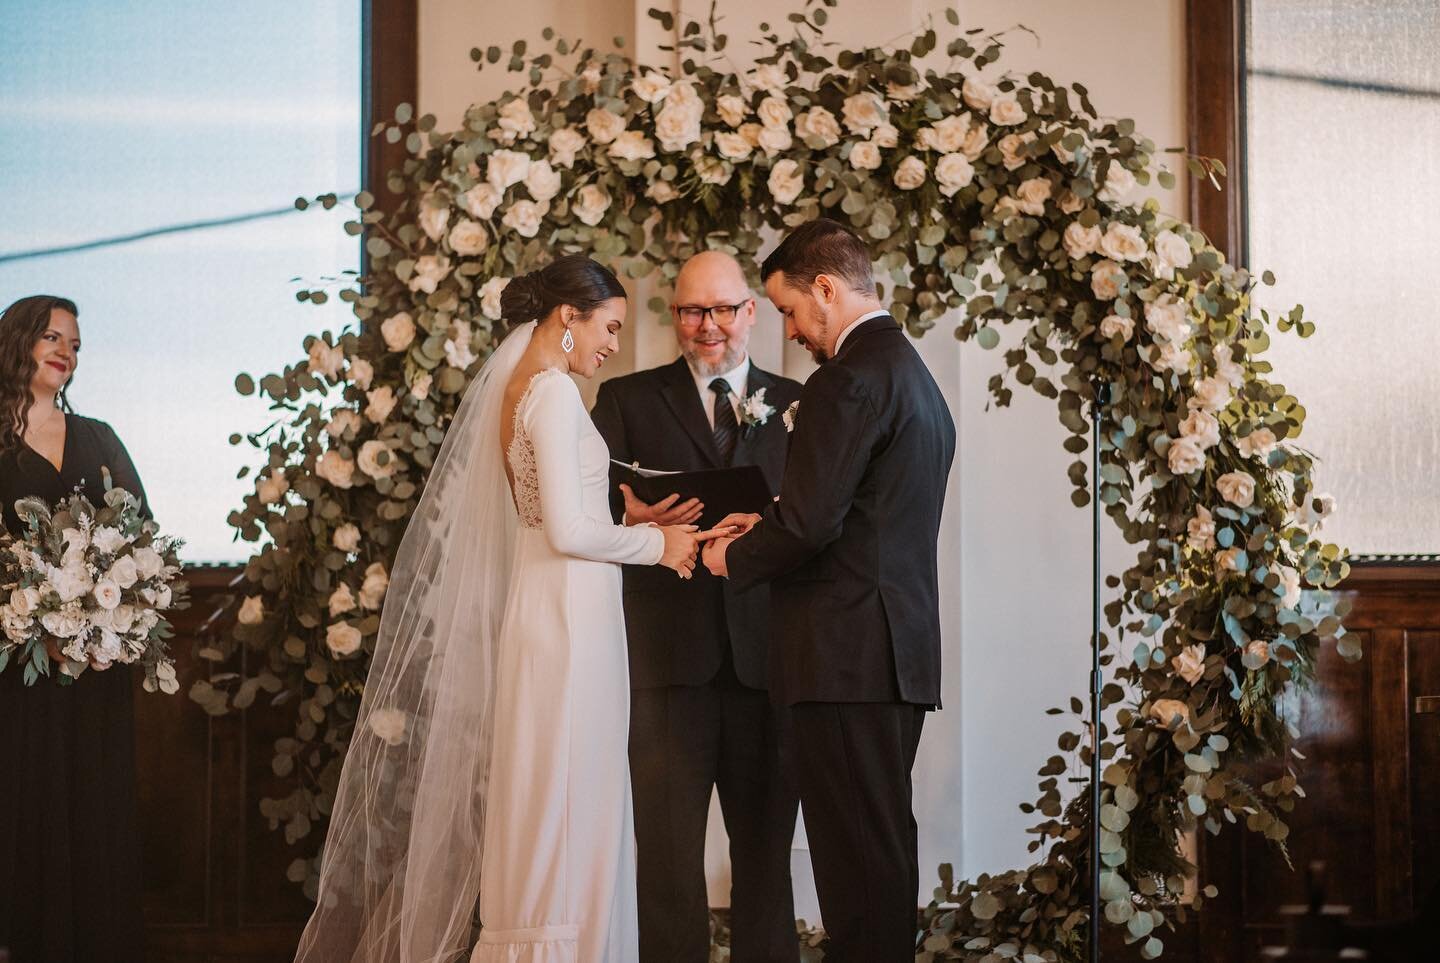 Swipe to see the JOY! 🤍 We just loved having Jada and Kevin! A truly beautiful couple with the most beautiful ceremony and celebration of vows. 📸 @openrhoadesphoto